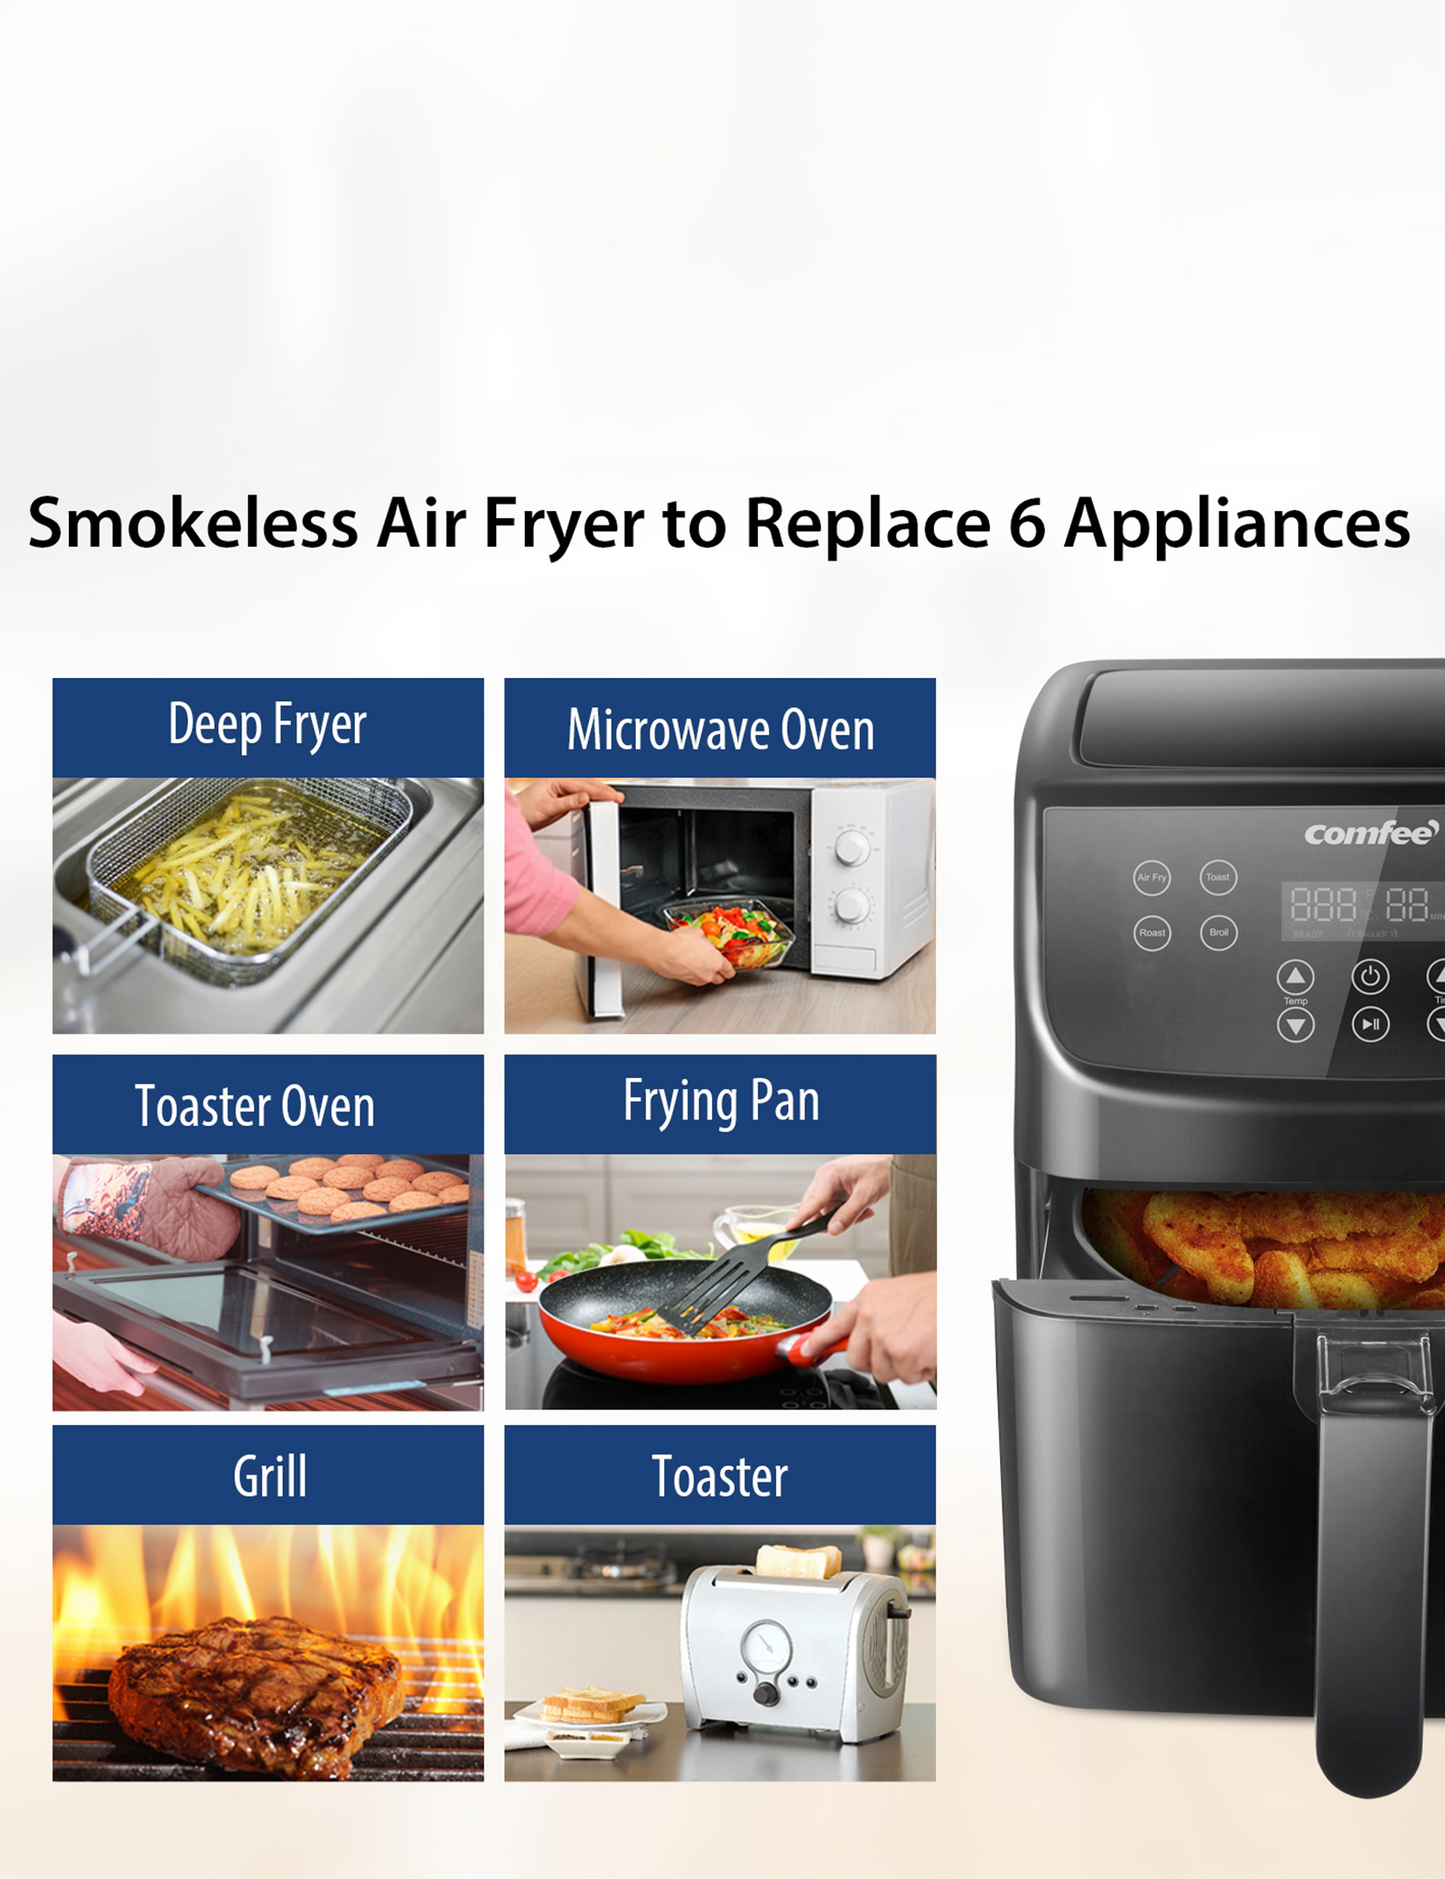 different uses the comfee digital air fryer has